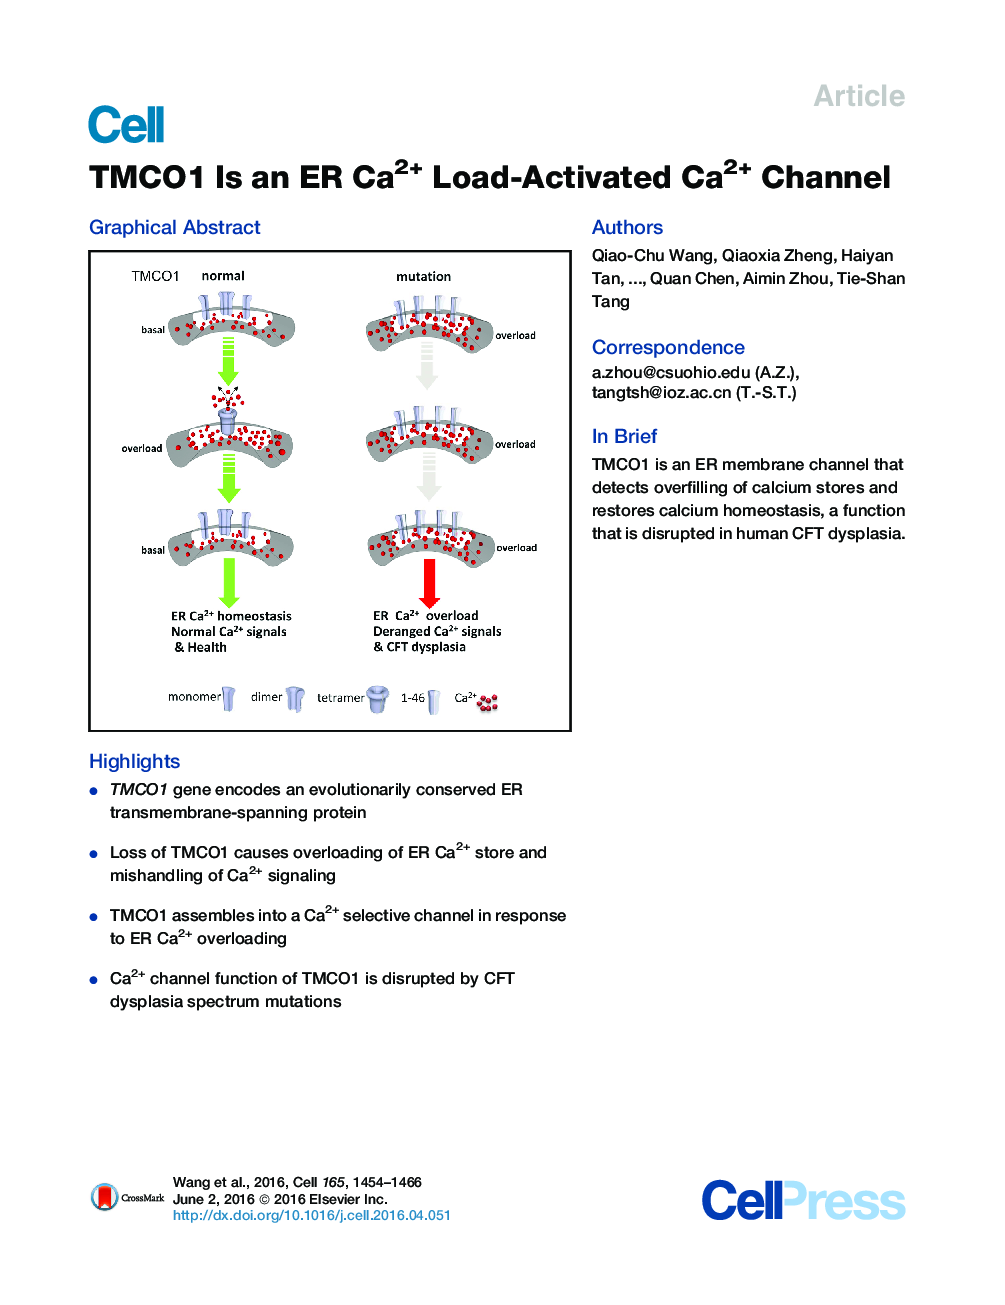 TMCO1 Is an ER Ca2+ Load-Activated Ca2+ Channel